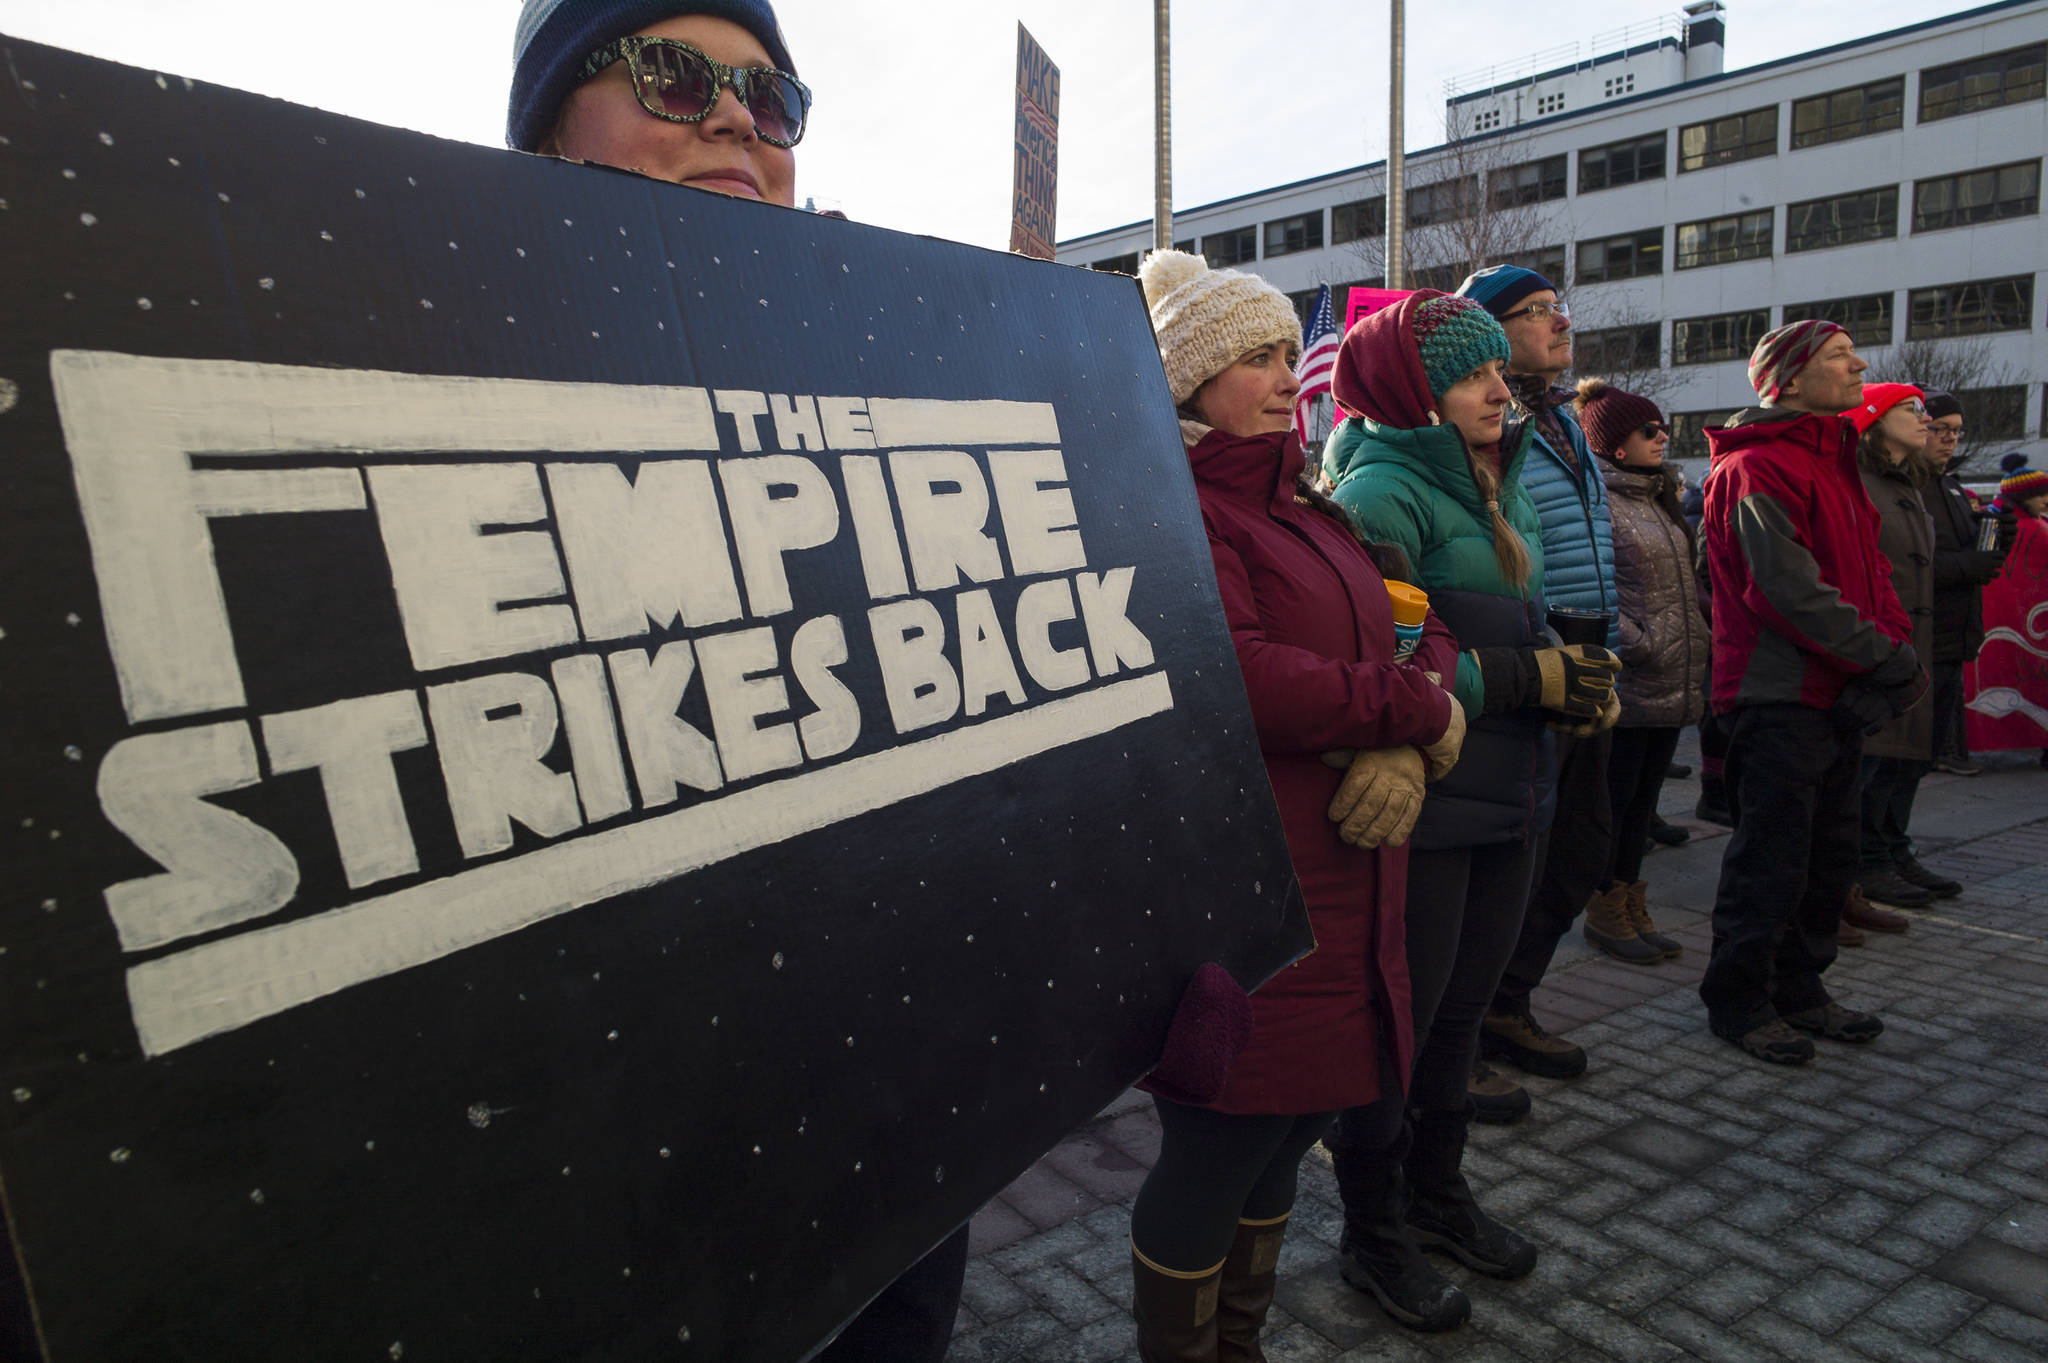 Scenes from the Women’s March on Juneau in front of the Alaska State Capitol on Saturday, Jan. 19, 2019. (Michael Penn | Juneau Empire)